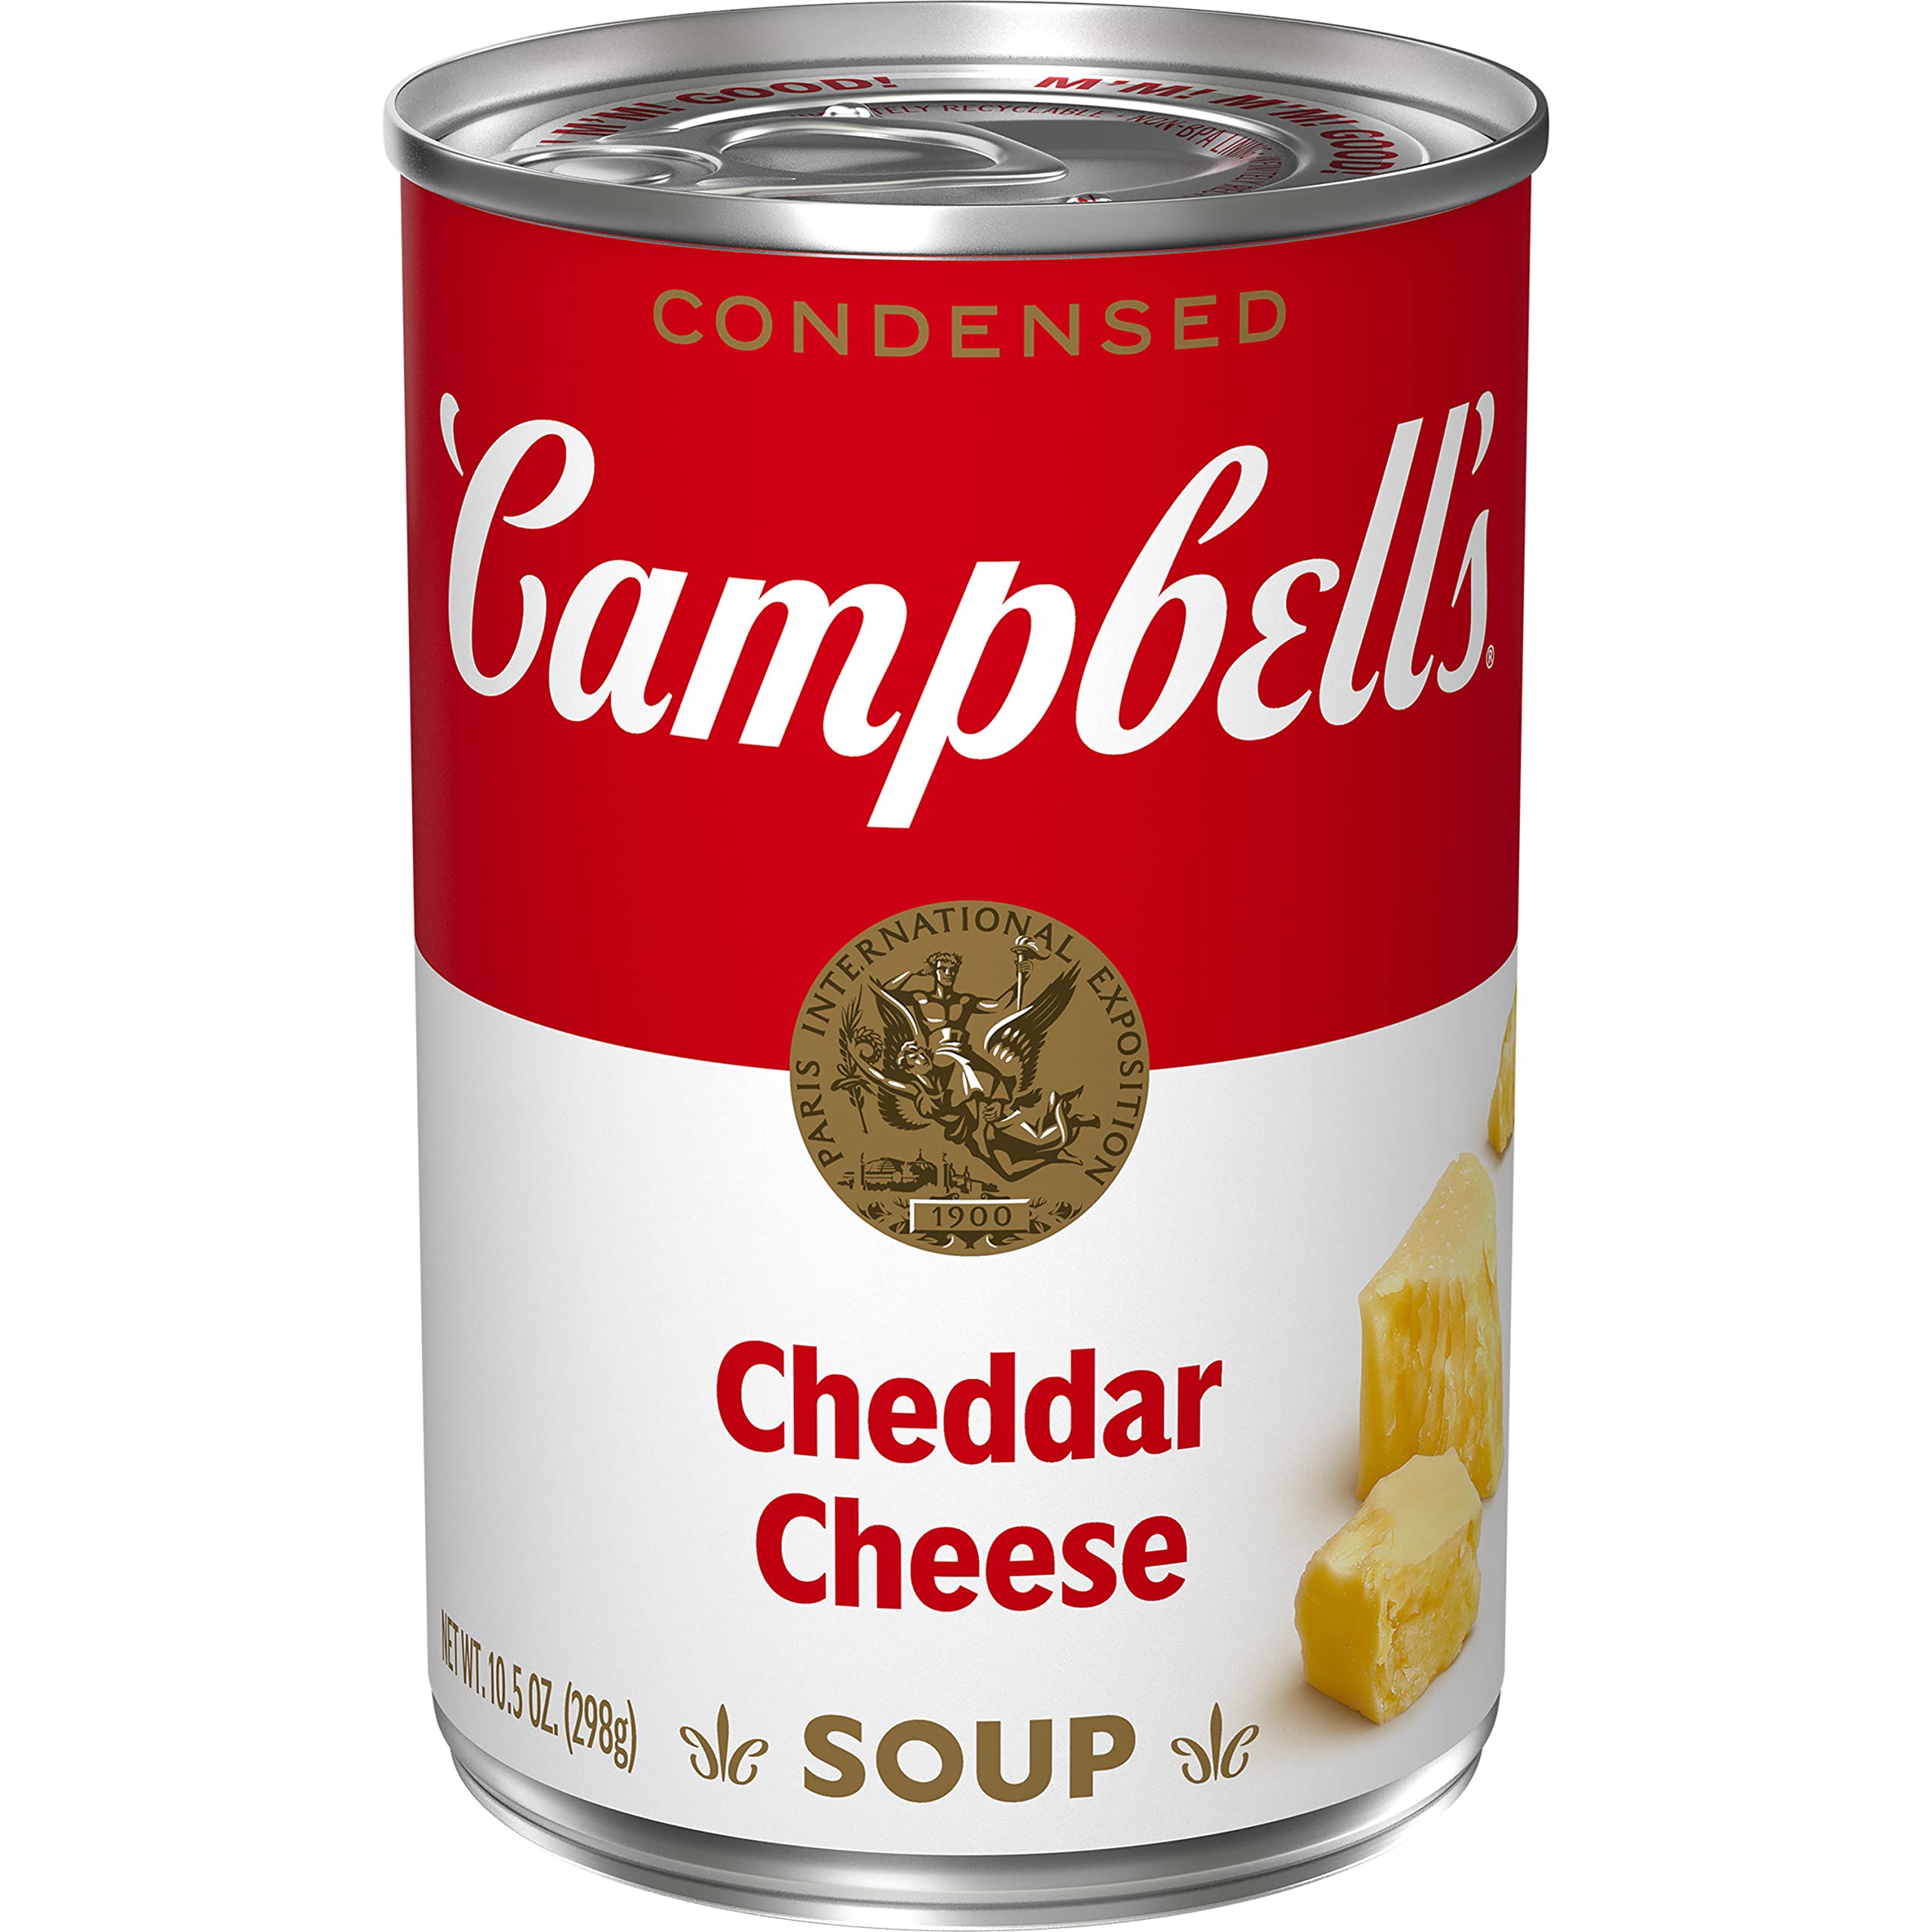 Campbell's Condensed Cheddar Cheese Soup, 10.5 Ounce Can: $1.10-1.23 w/Subscribe & Save, limit of 10/2 subscriptions $1.23